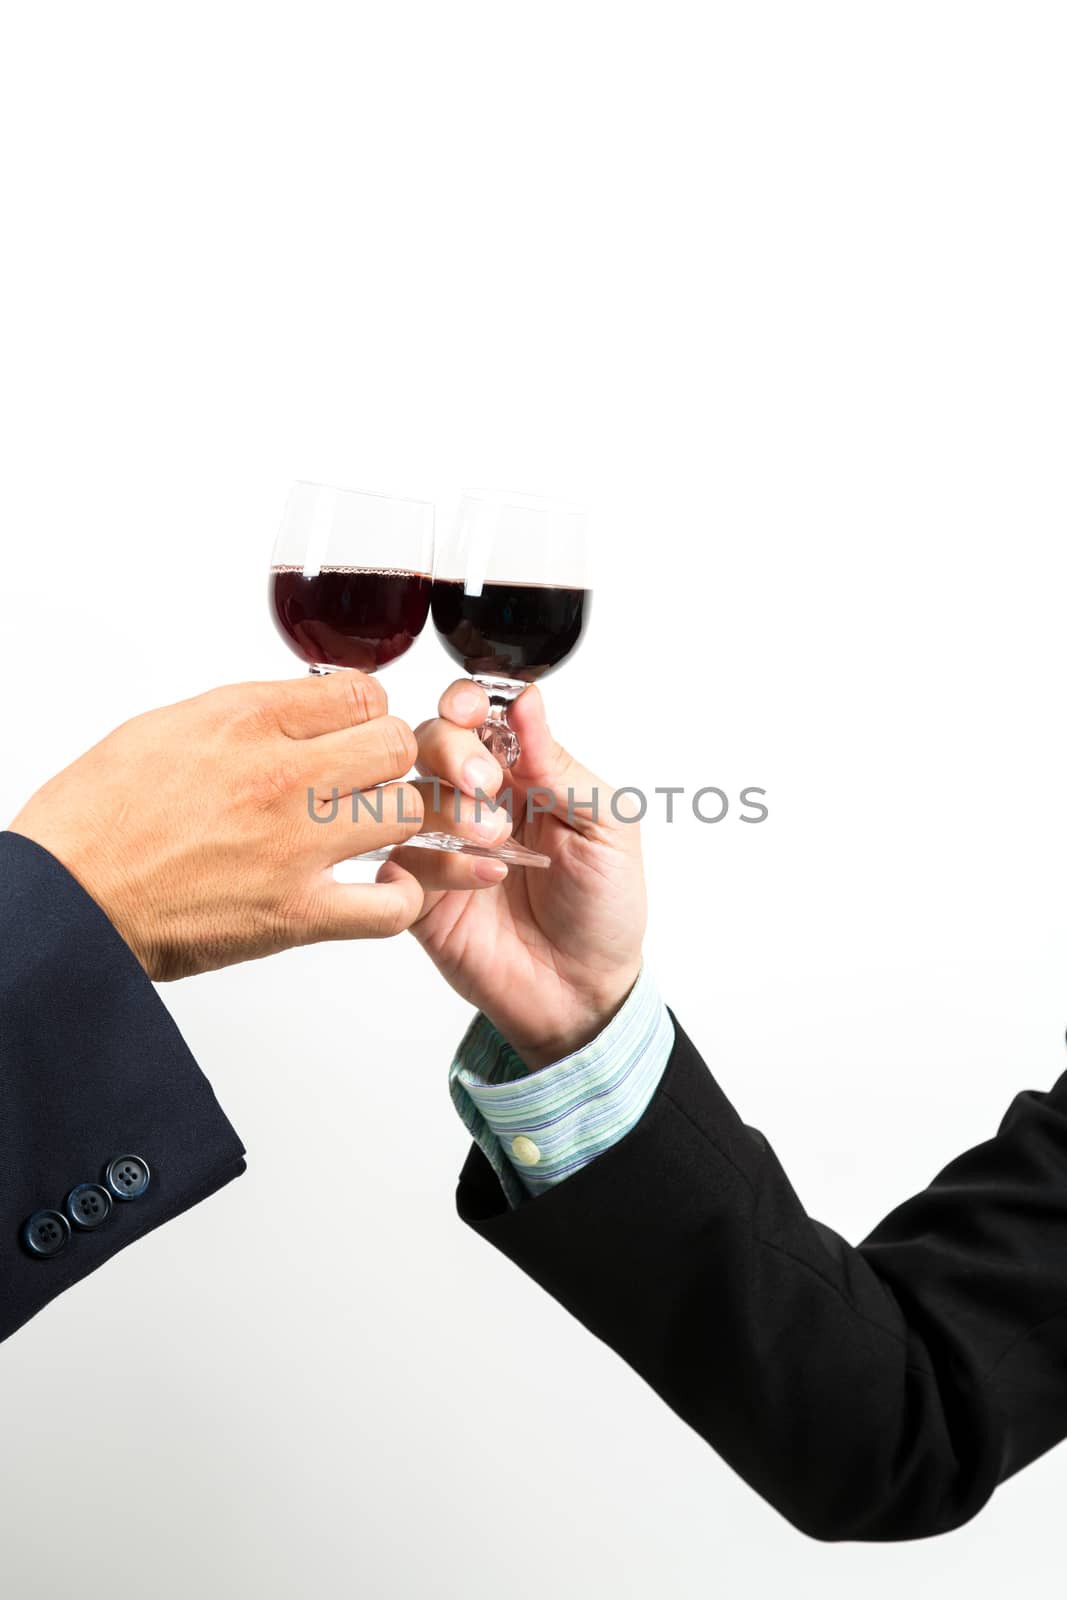 Close-up of human hands cheering up with flutes of wine